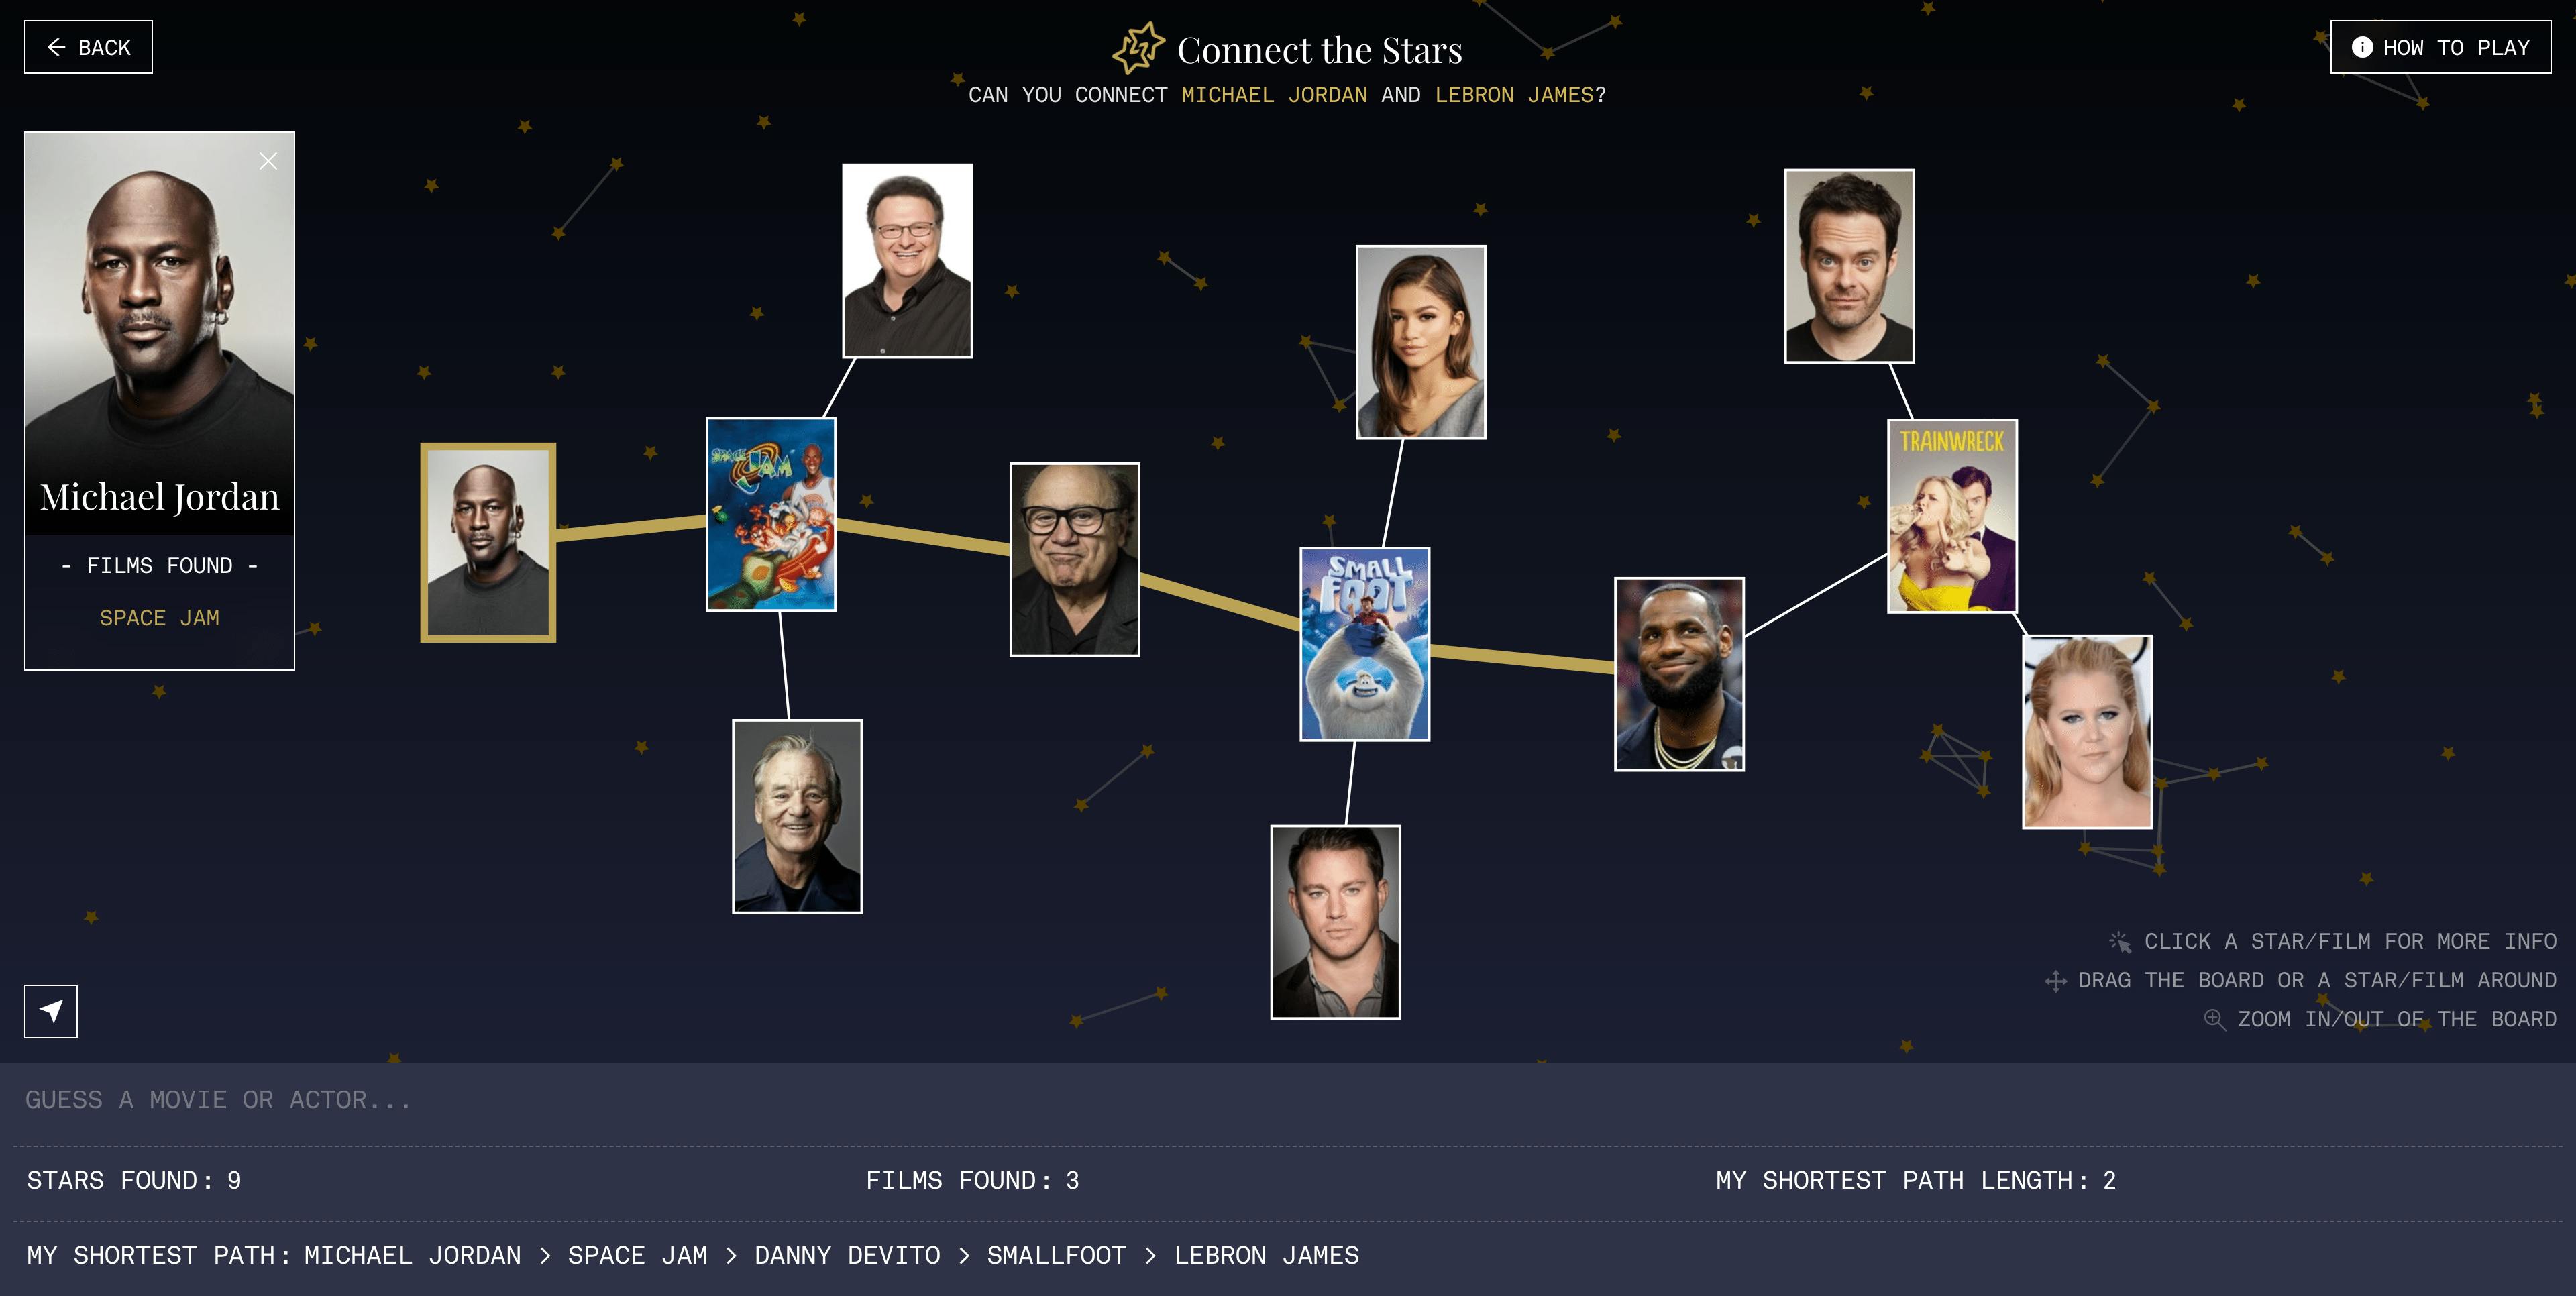 Another game of Connect the Stars